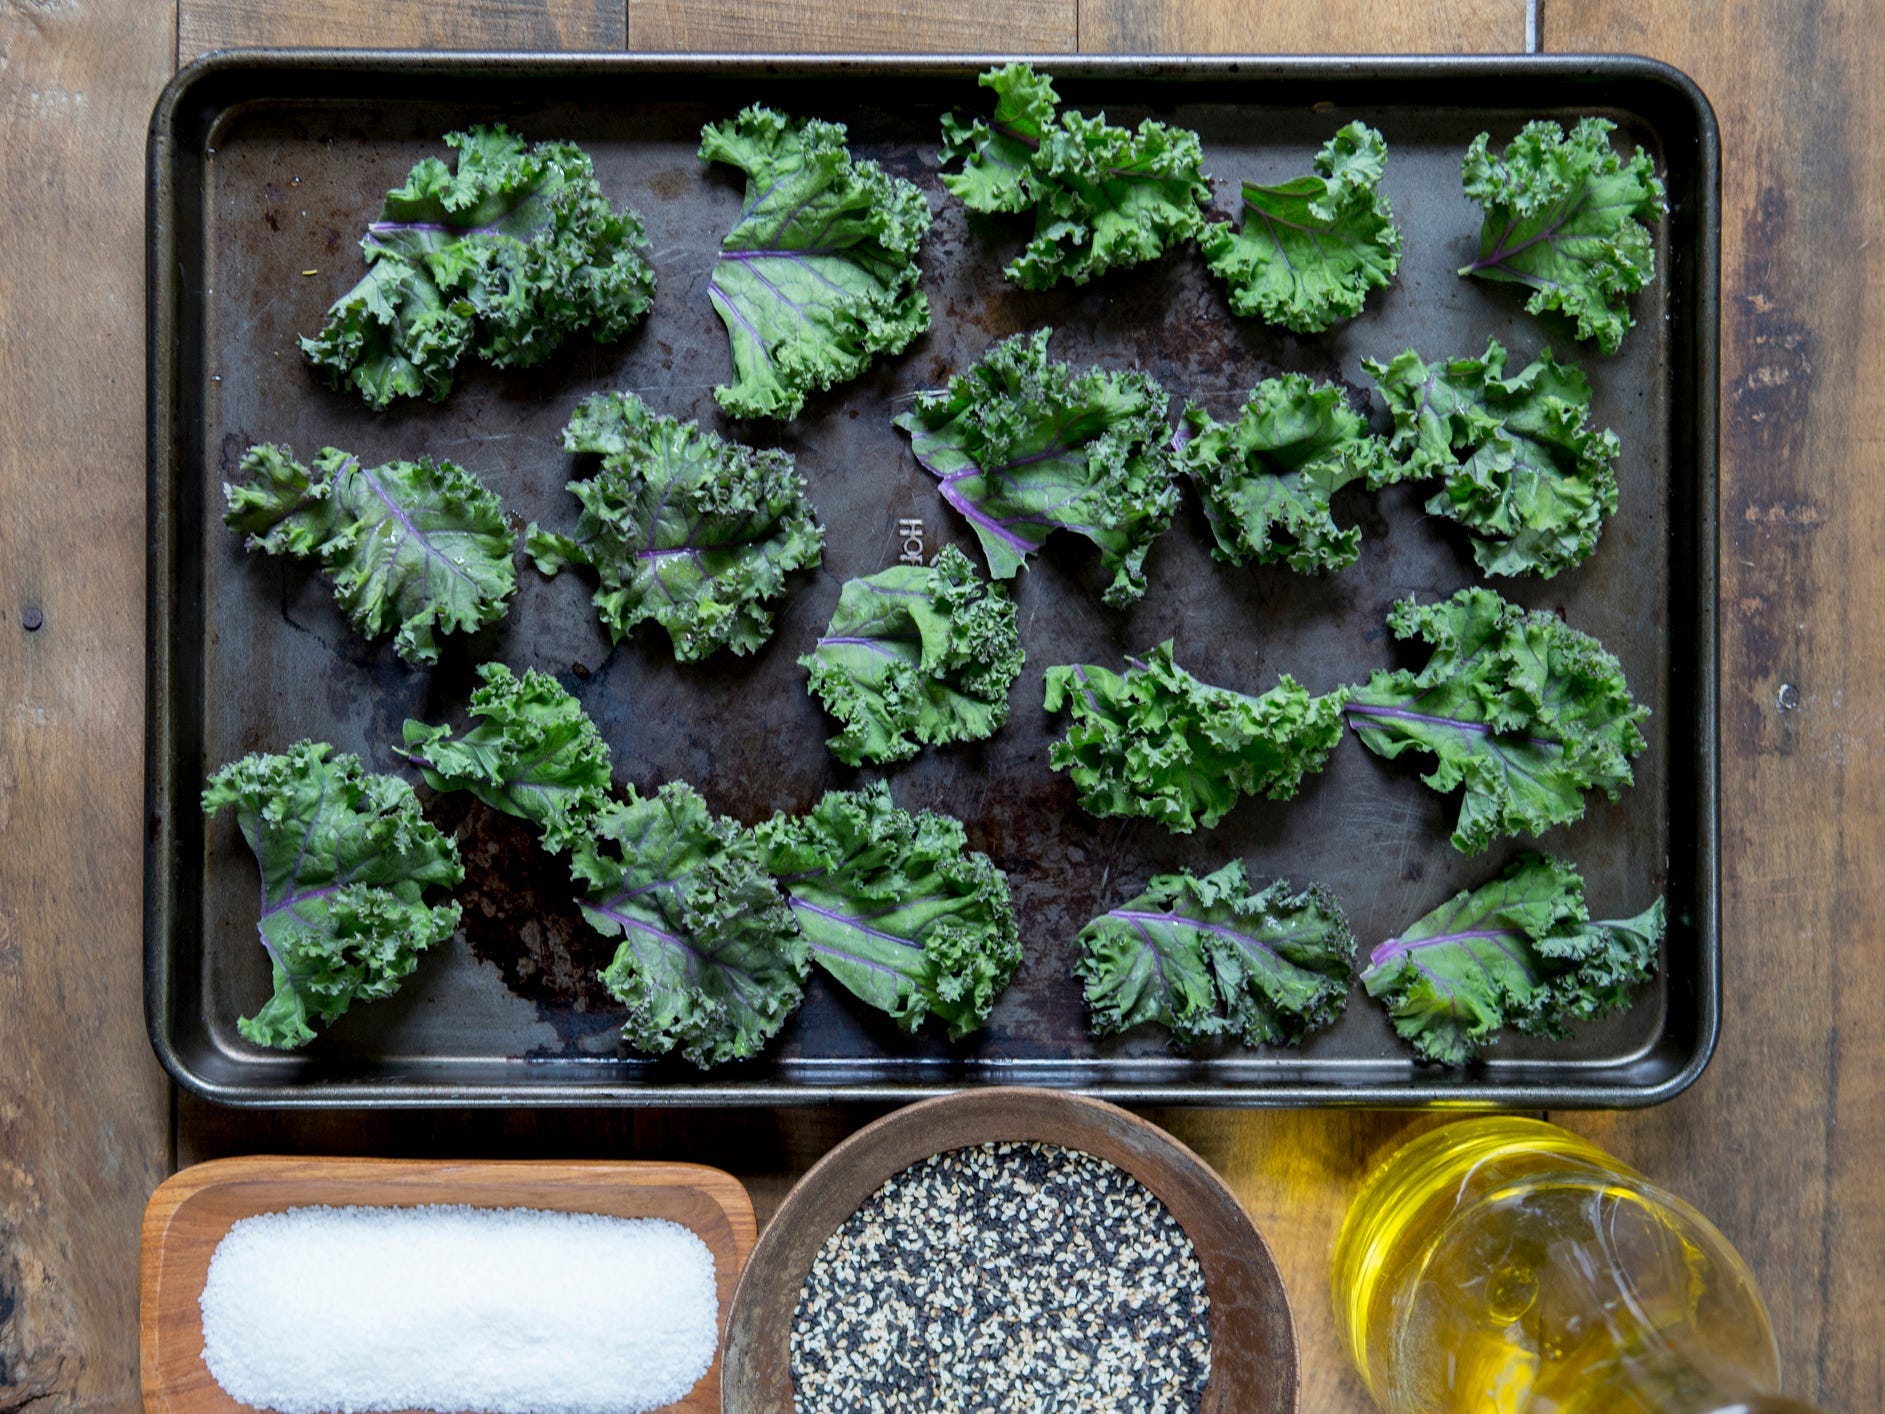 Kale chips being prepped for the oven